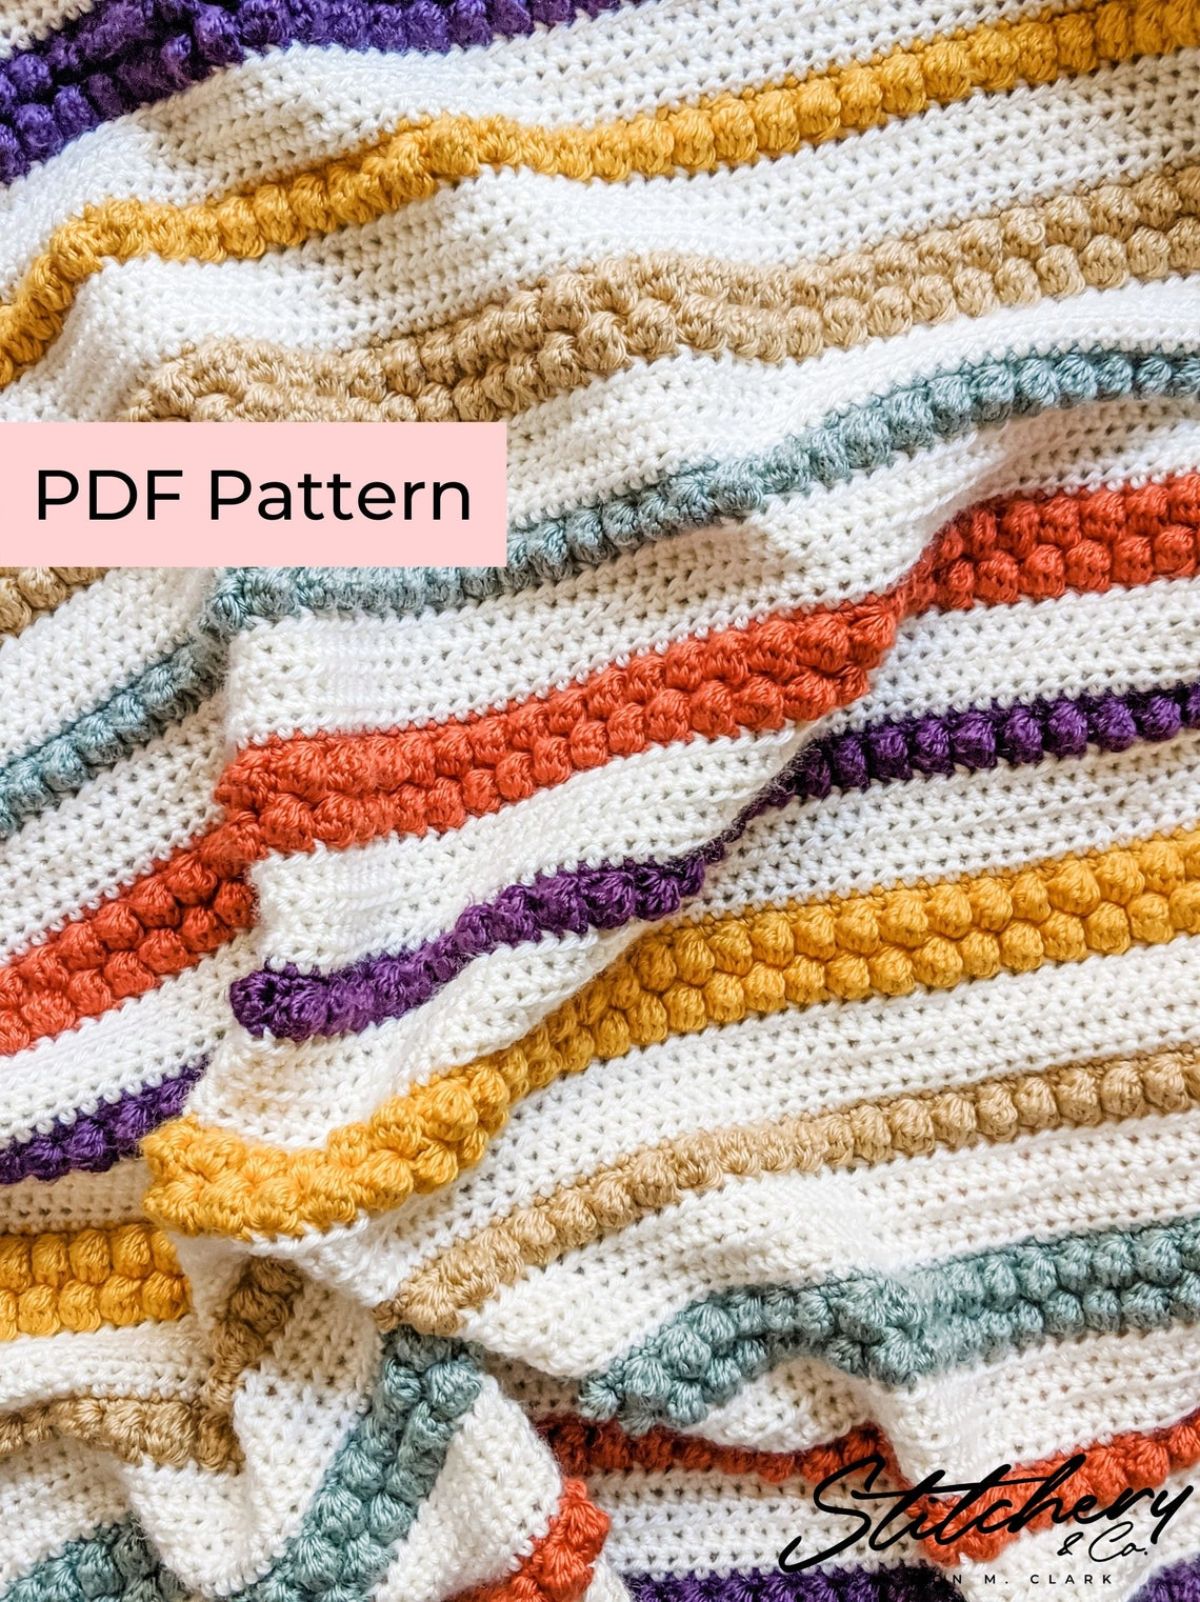 A cream crochet blanket with orange, purple, yellow, and green horizontal stripes using small bobbles all over the blanket.